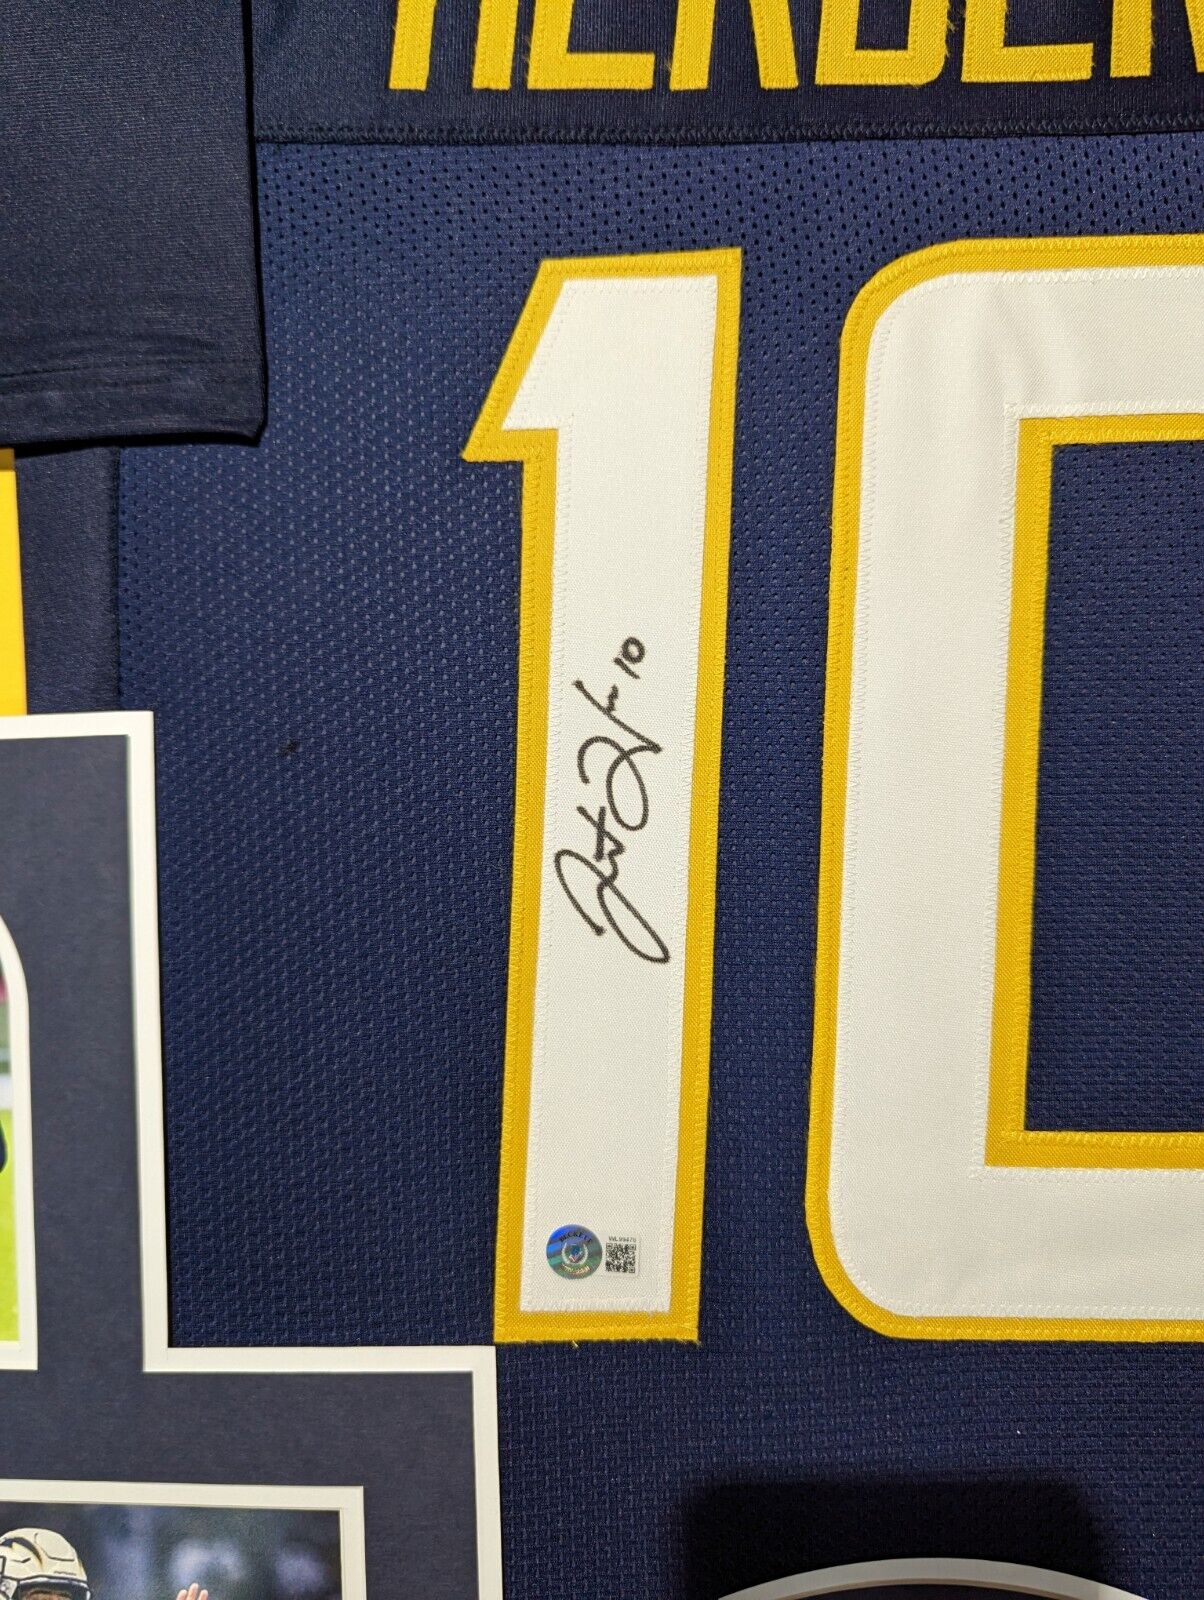 Justin Herbert Autographed Framed Los Angeles Chargers Jersey (Beckett